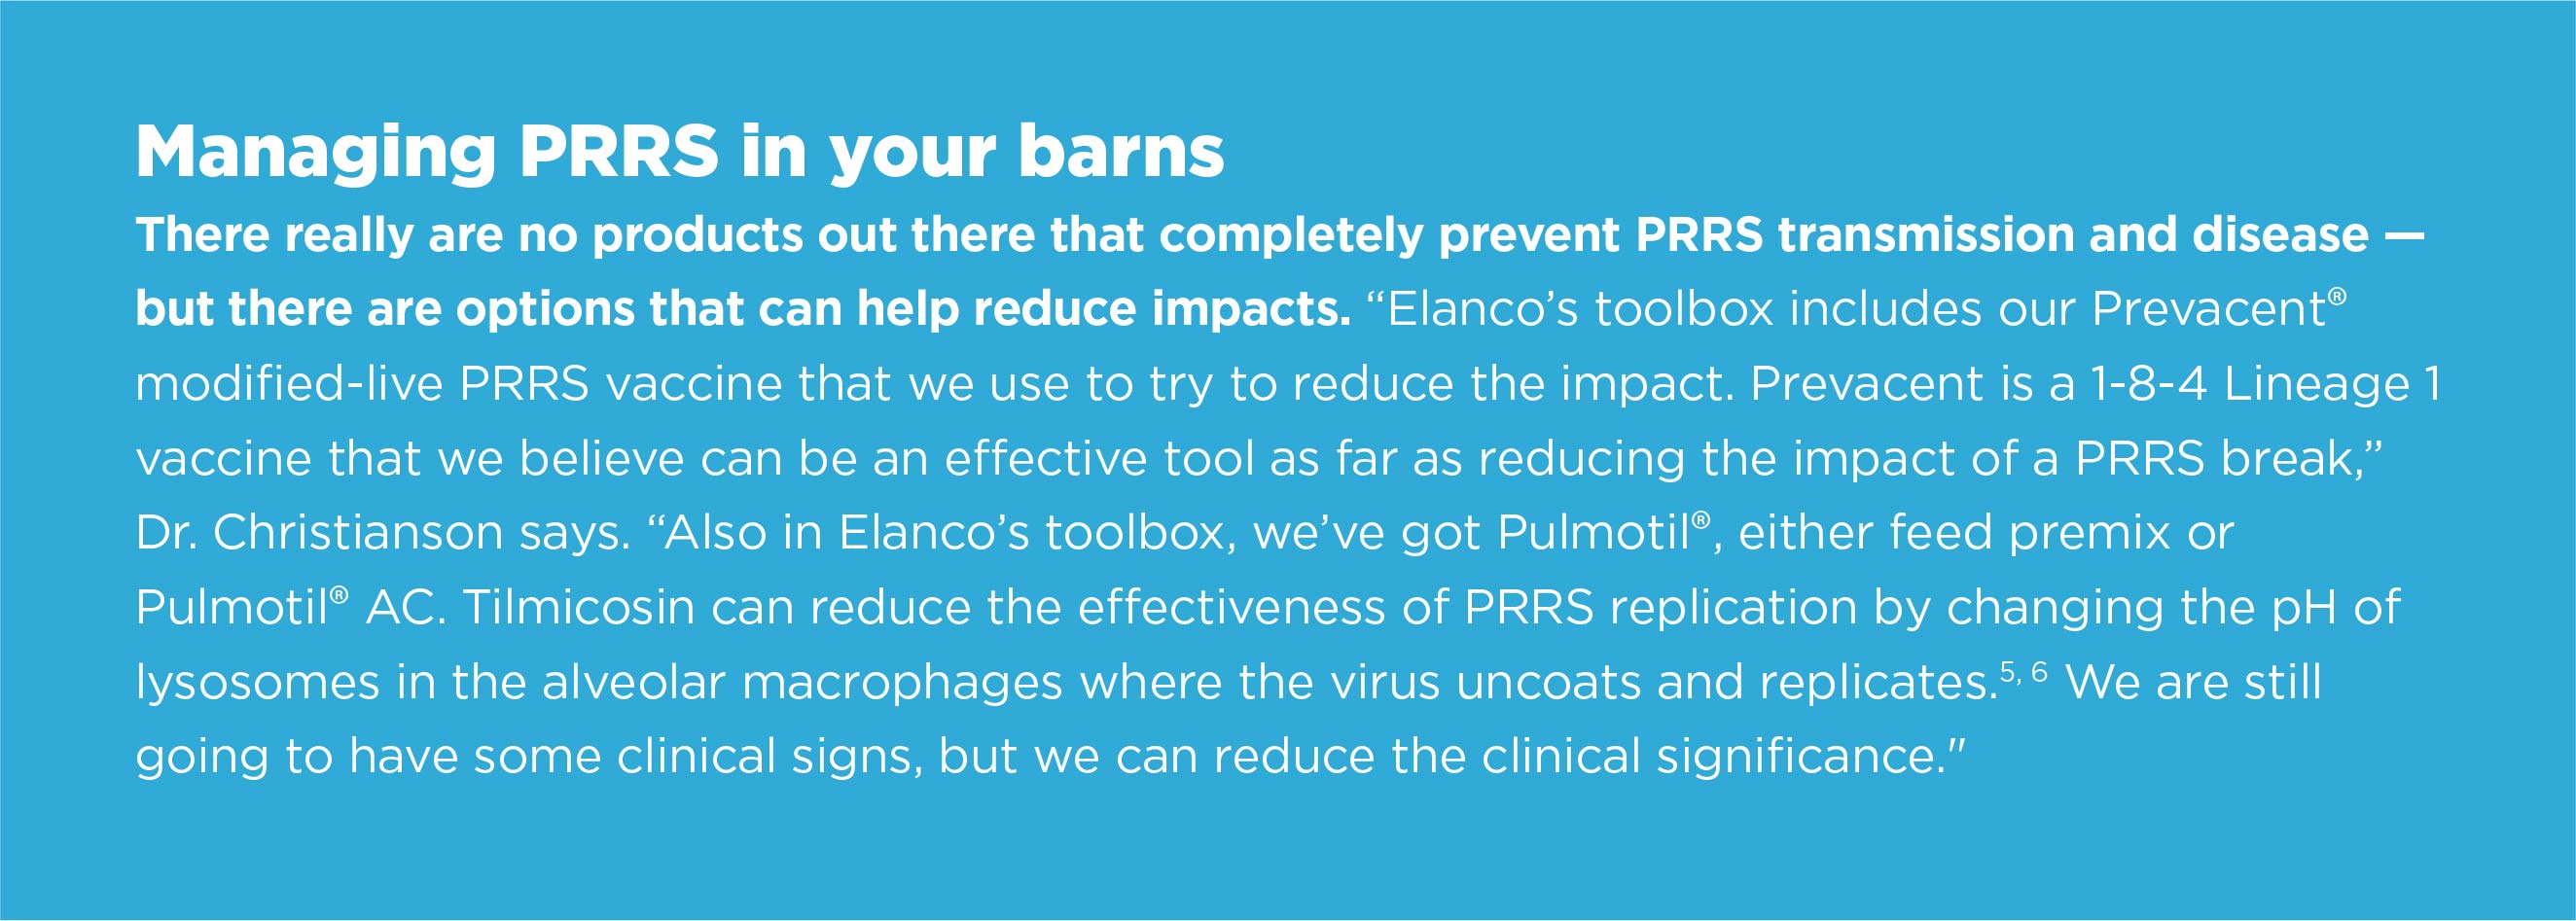 Managing PRRS in your barns